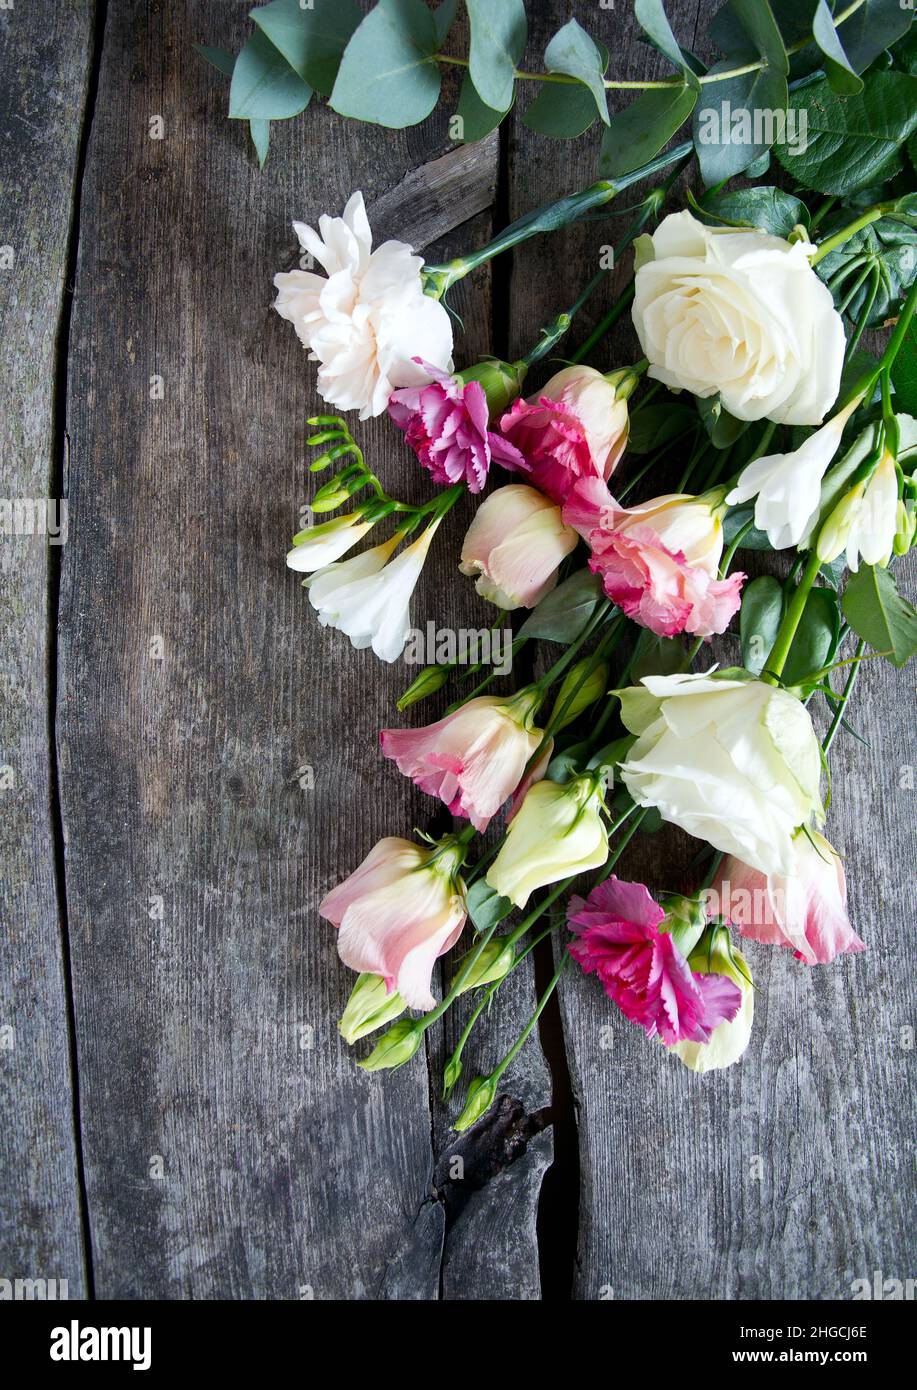 bouquet of beautiful flowers on wooden surface Stock Photo